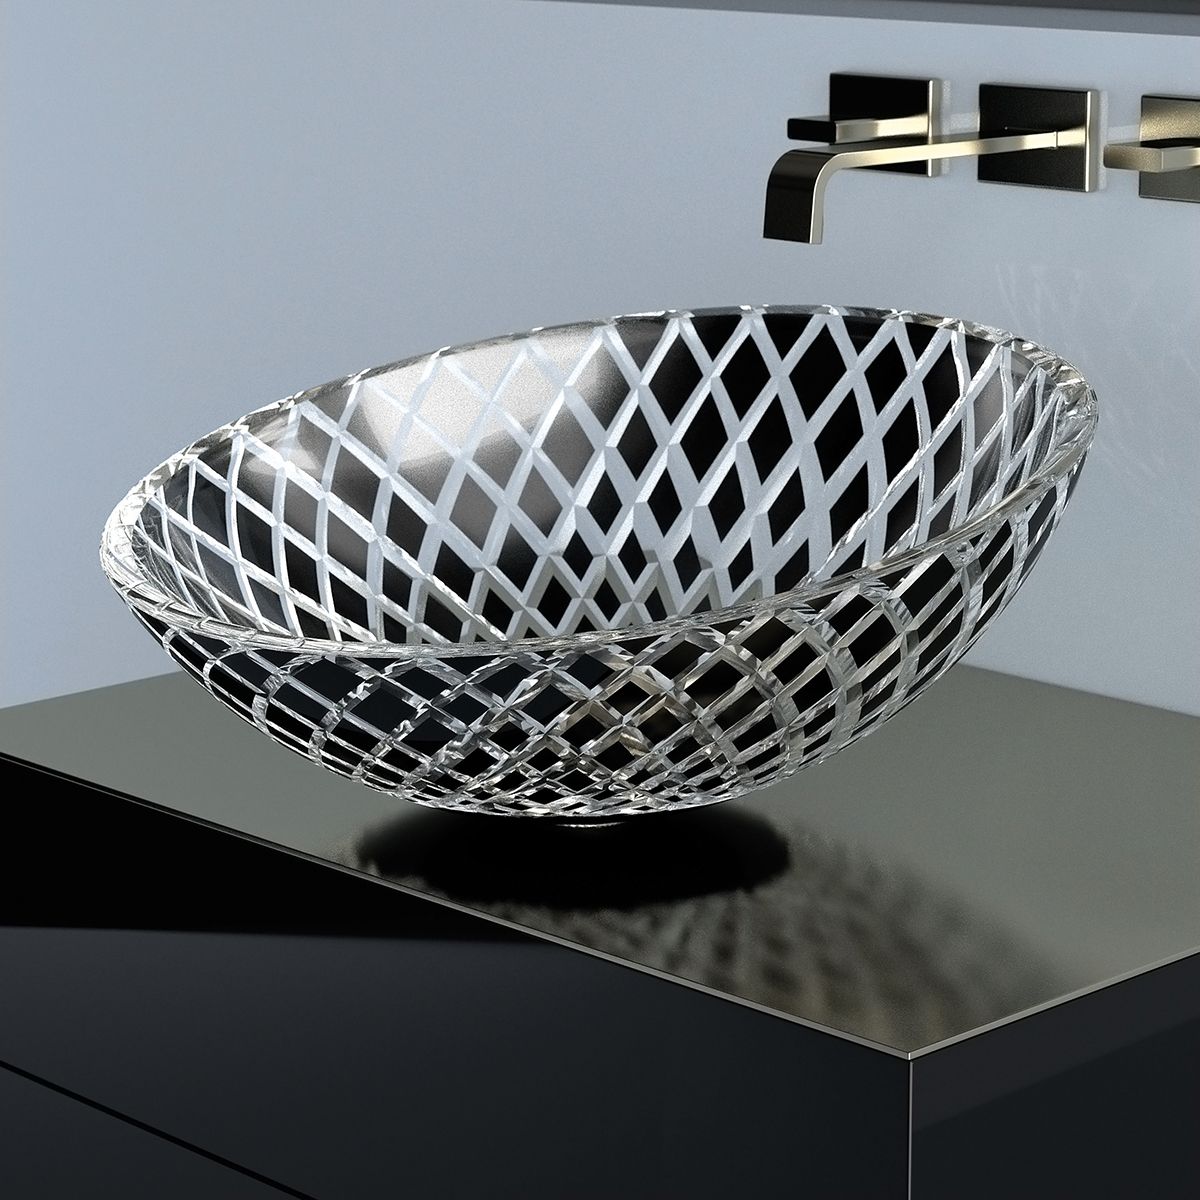 Decorative Bathroom Fixtures Create a Beautiful Base - Black and White Vessel Sink